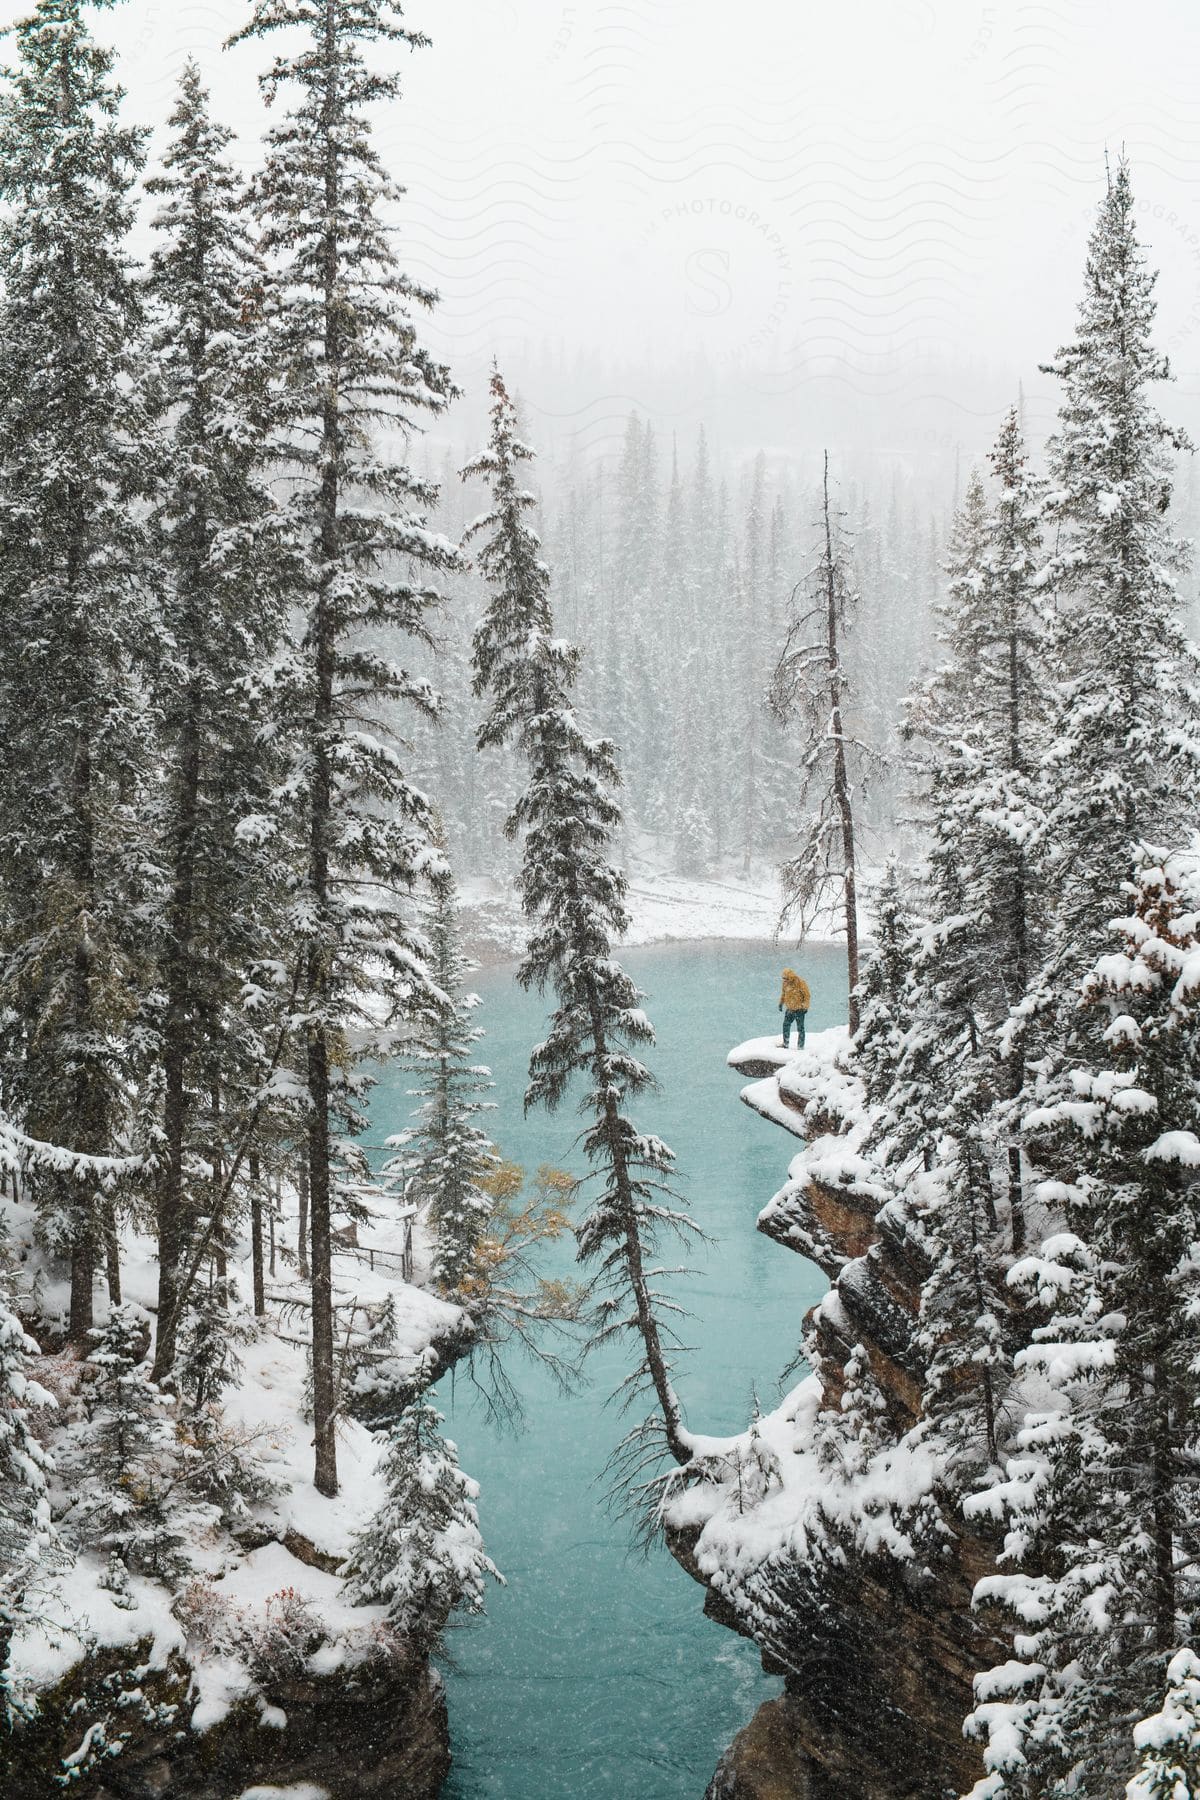 A man looks down into the water of a snowcovered lake surrounded by a forest